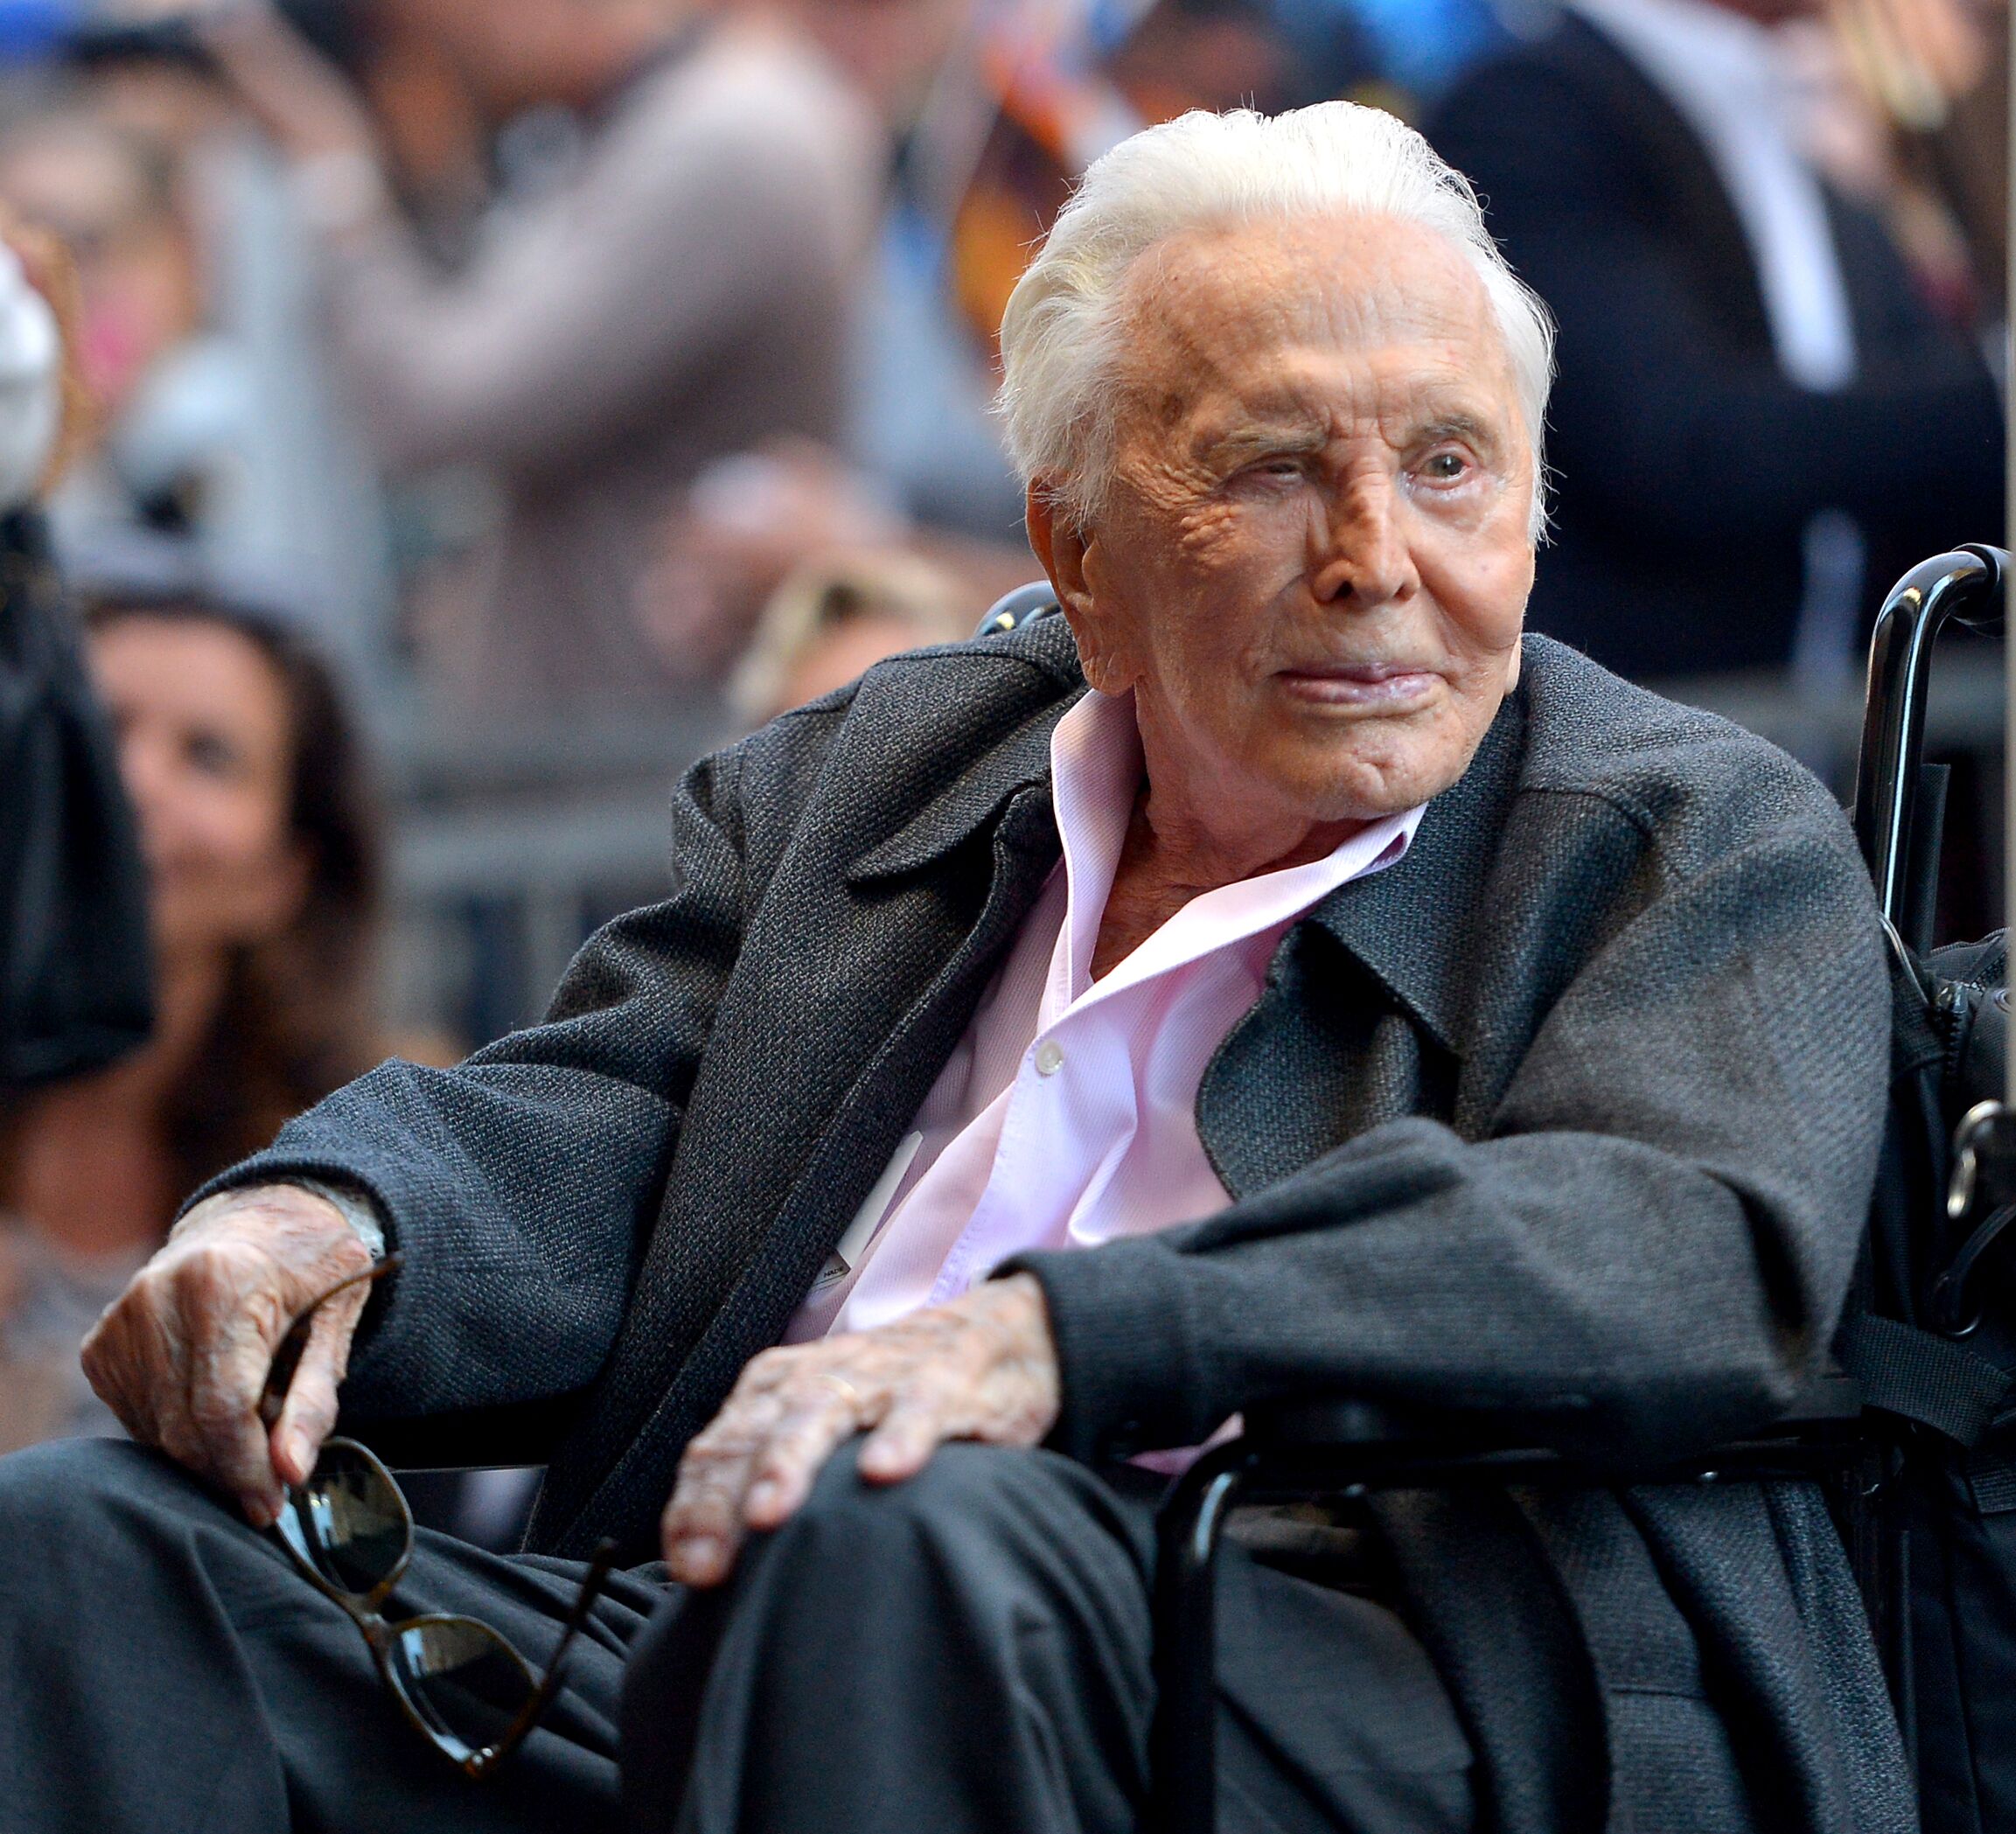 Kirk Douglas attends the Hollywood Walk of Fame Ceremony Honoring Michael Douglas on Hollywood Boulevard on November 06, 2018. | Photo: Getty Images